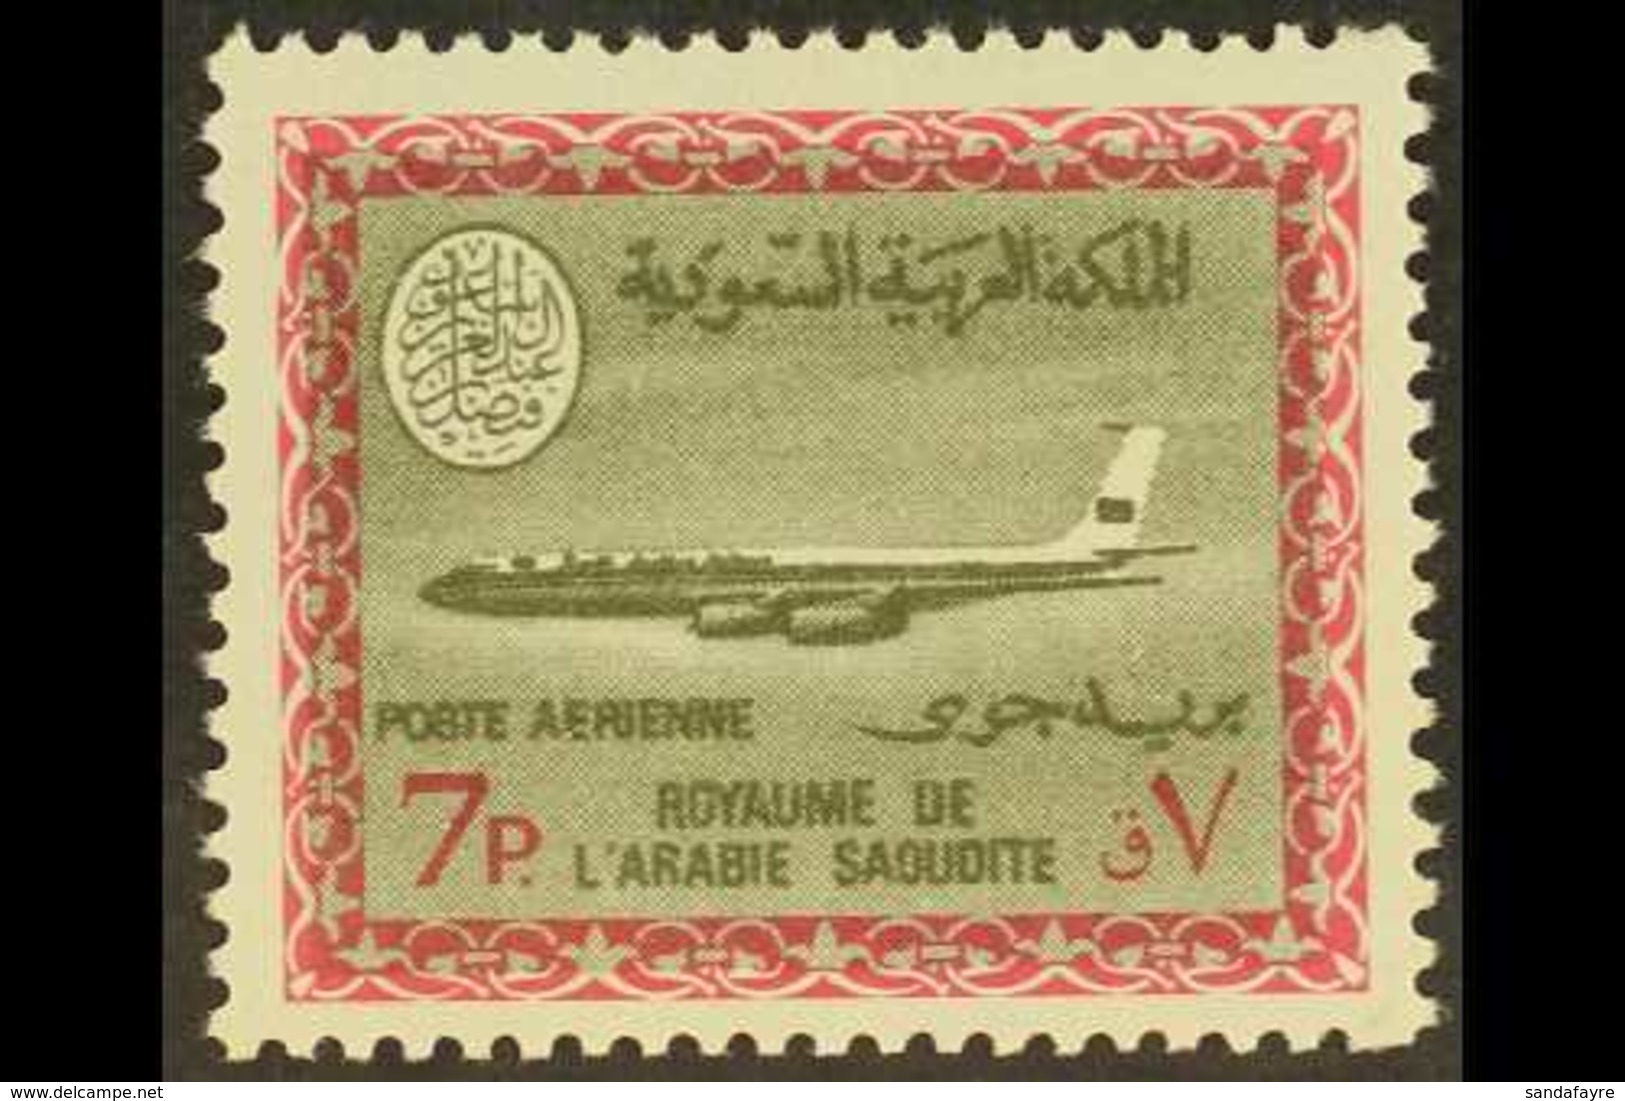 1966-75  7p Bronze-green & Light Magenta Air Aircraft, SG 722, Very Fine Never Hinged Mint, Fresh. For More Images, Plea - Saudi Arabia